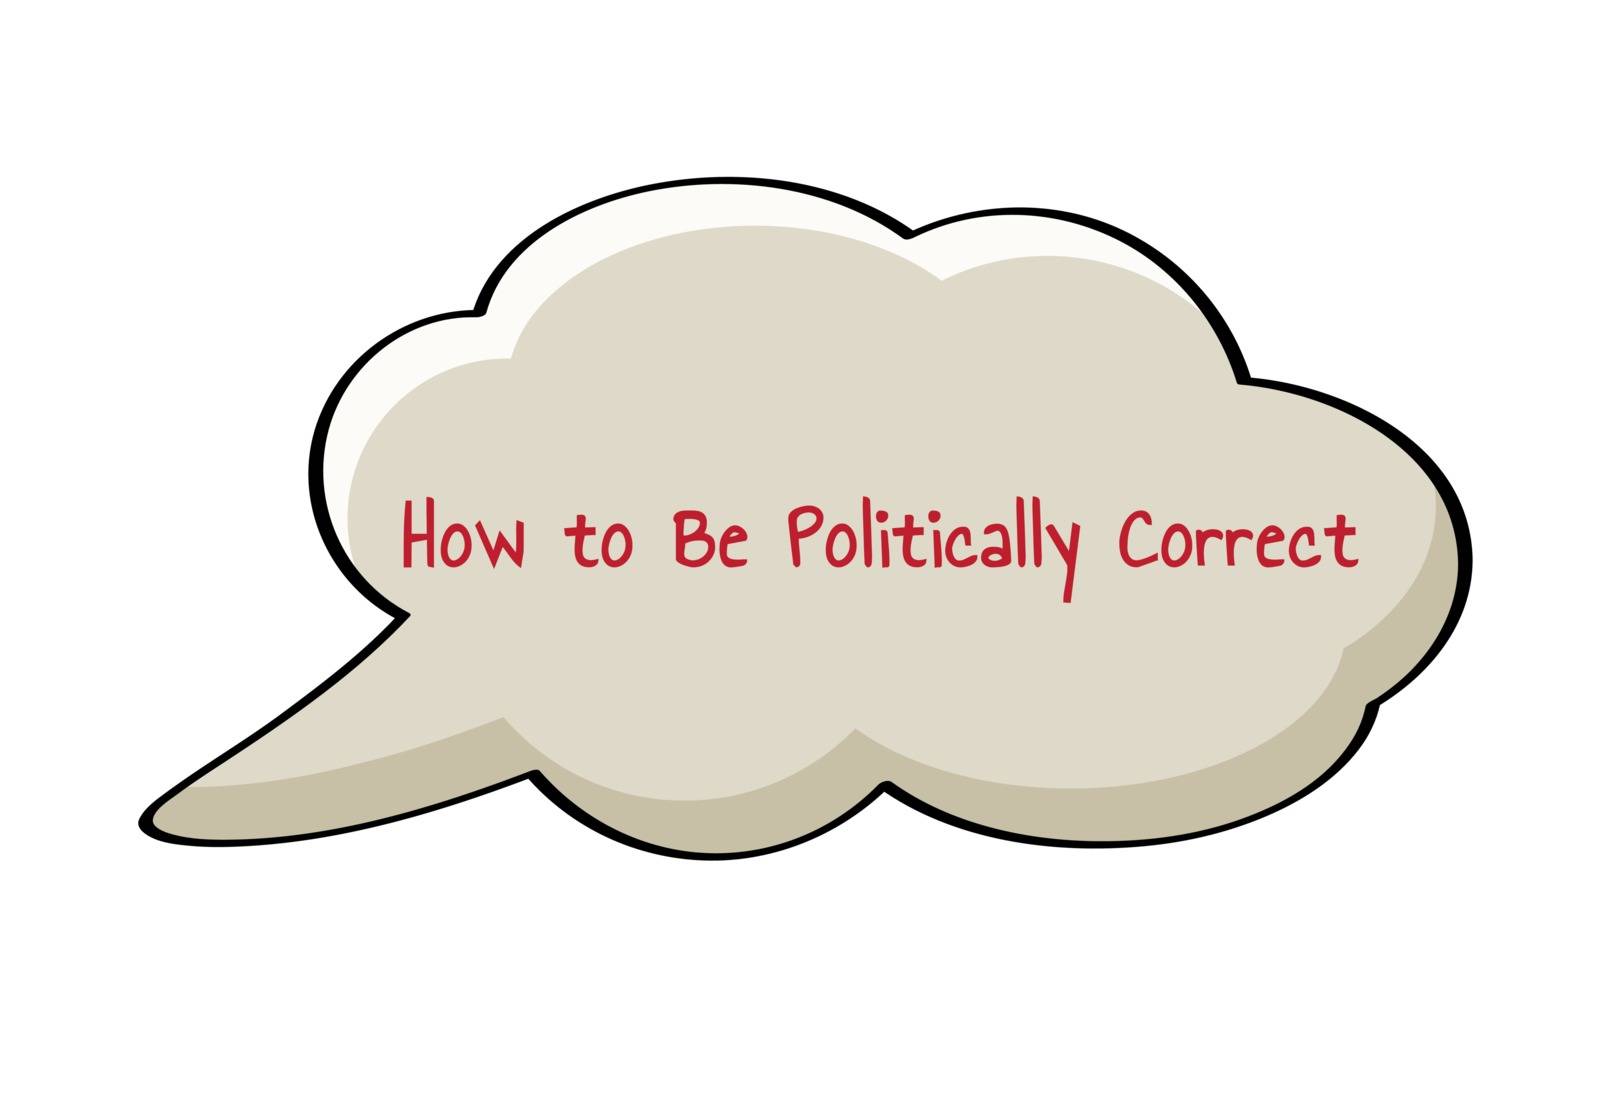 Speak bubble with text How to Be Politically Correct